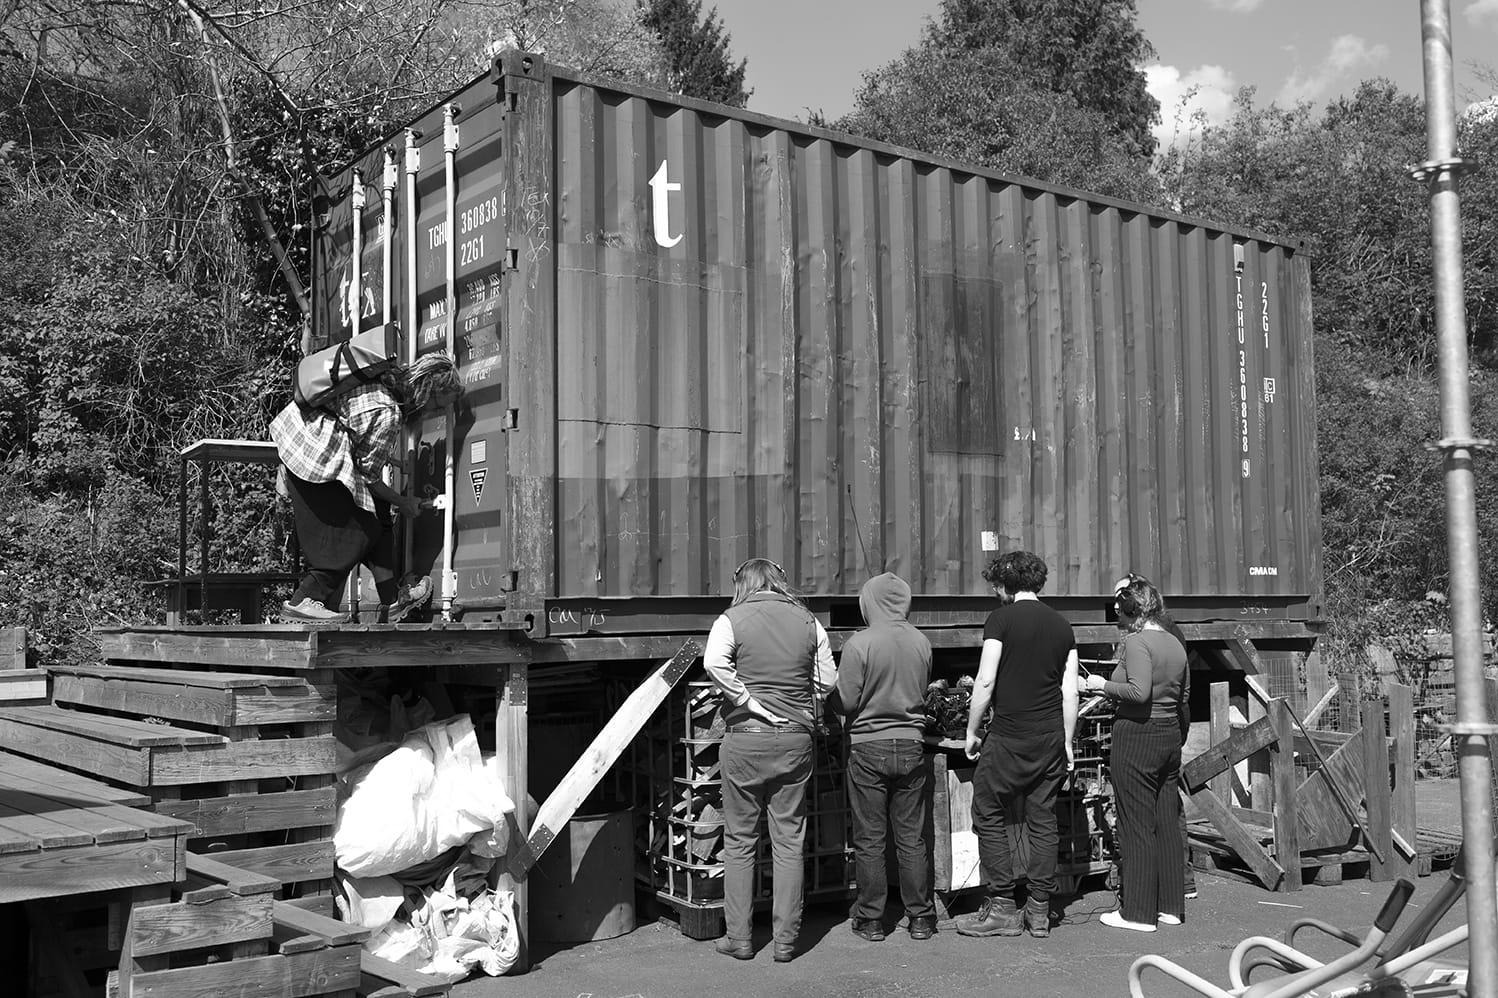 The group listening closely and recording a container used for storage at floating.